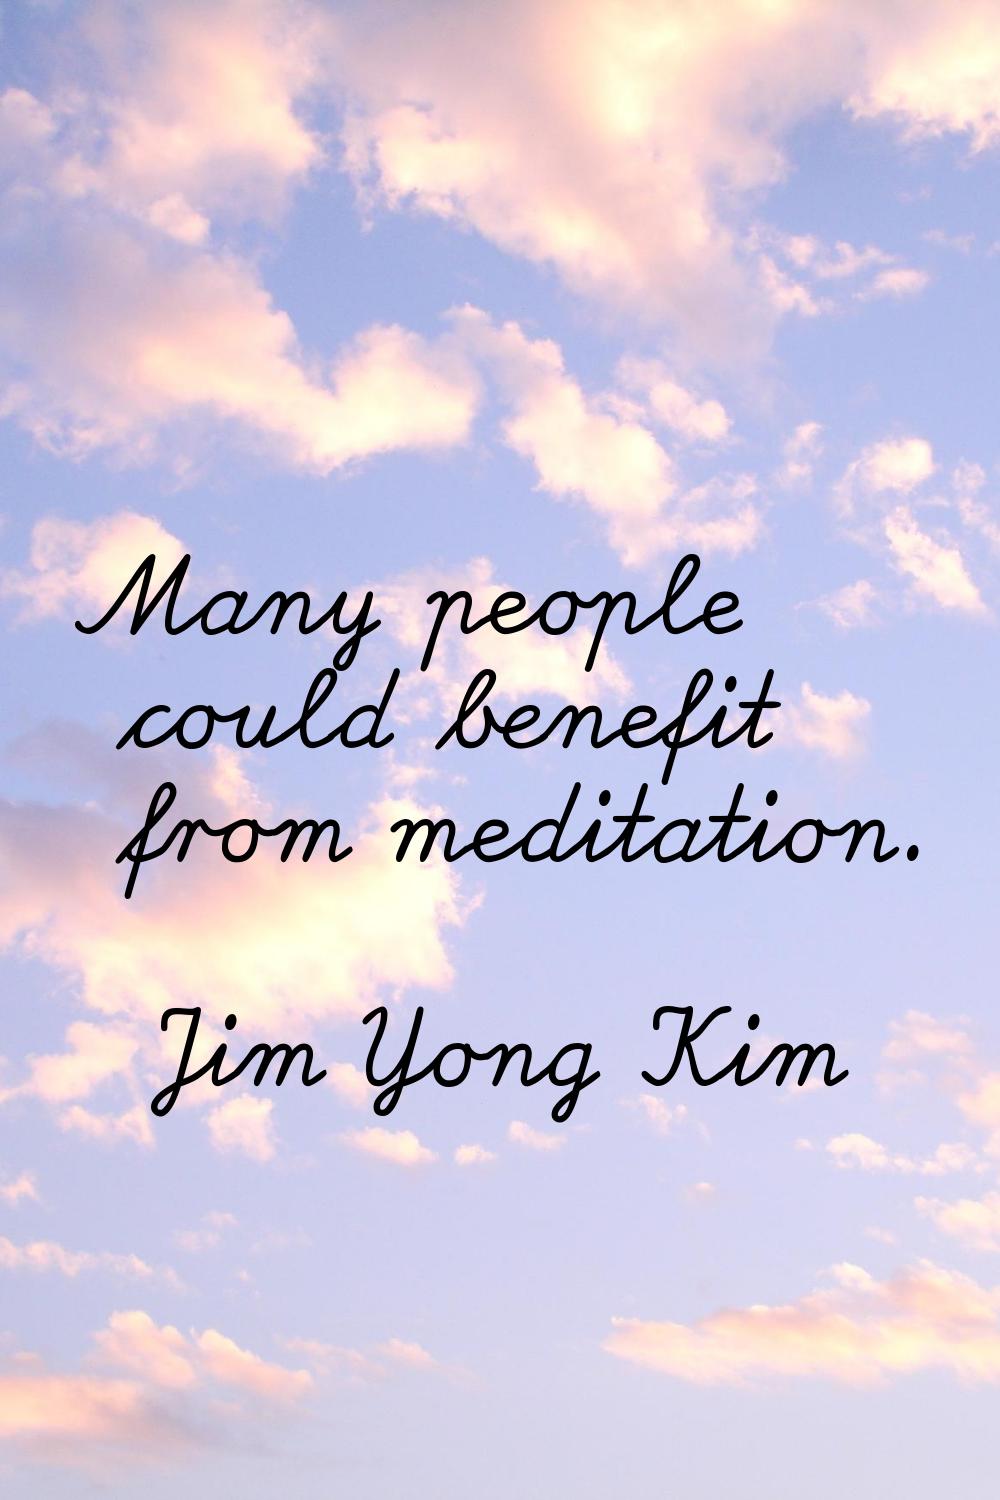 Many people could benefit from meditation.